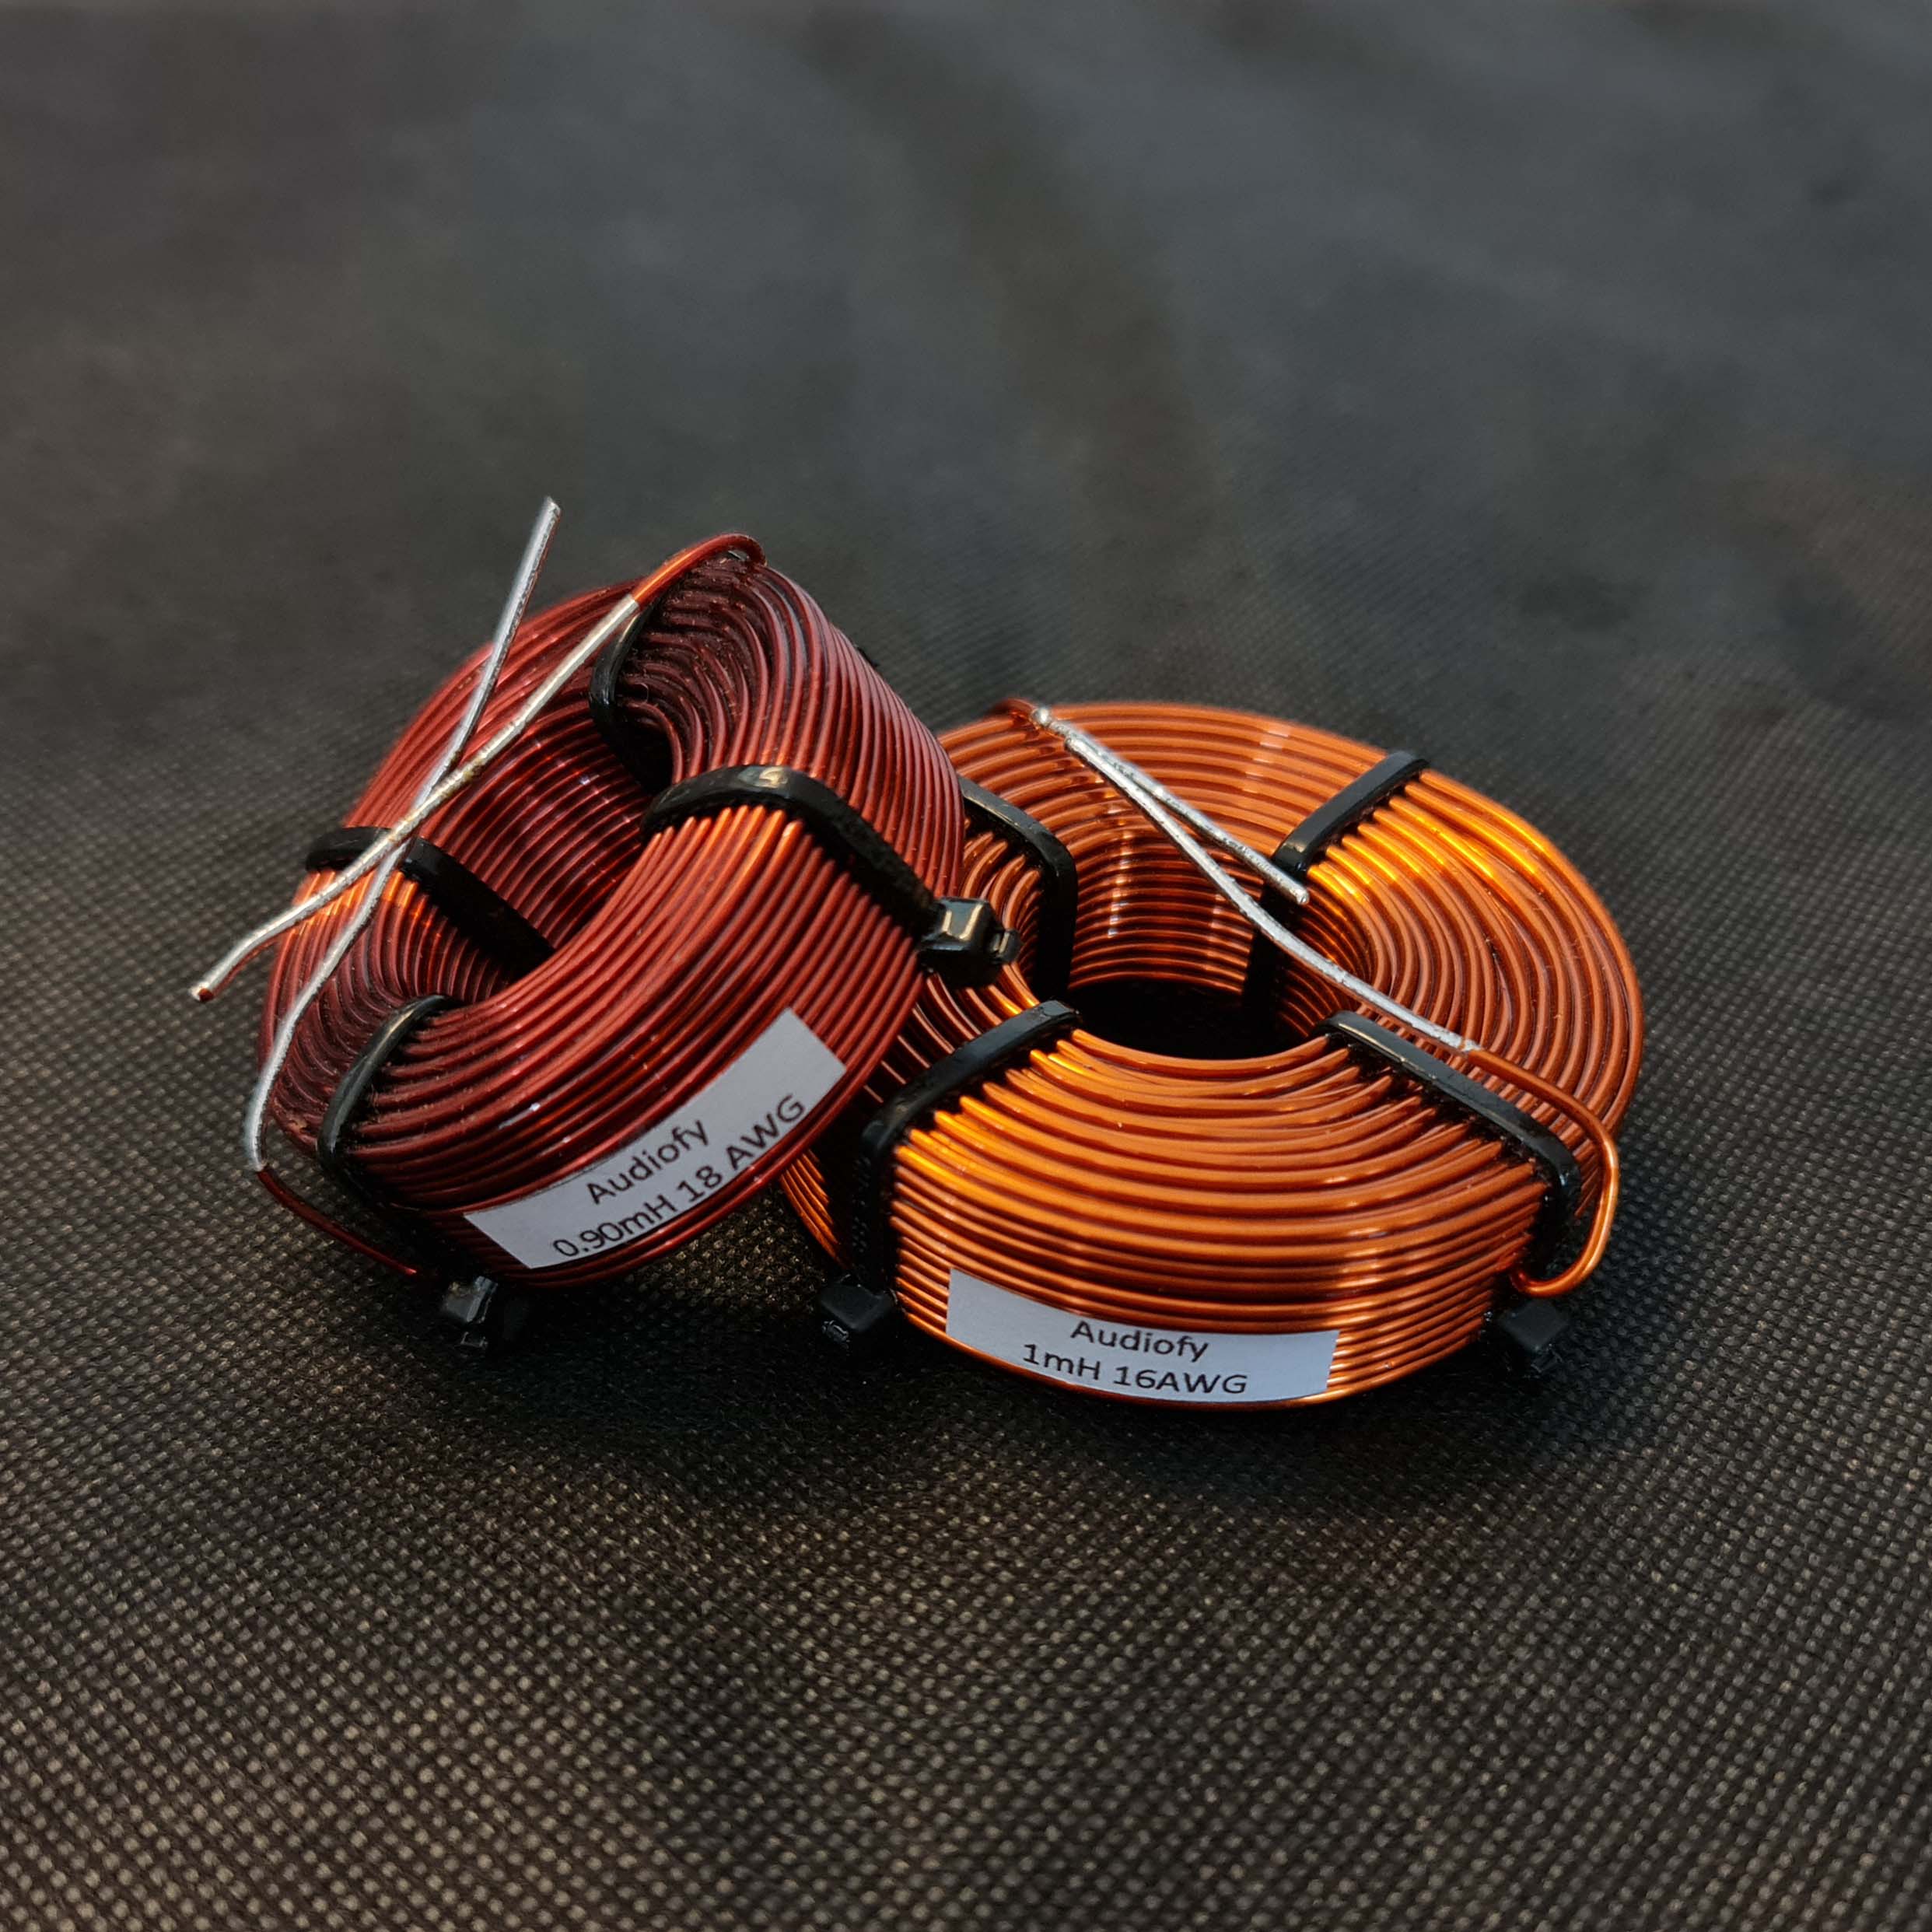 Audiofy 0.80mH 16 AWG Air Core Crossover Inductor